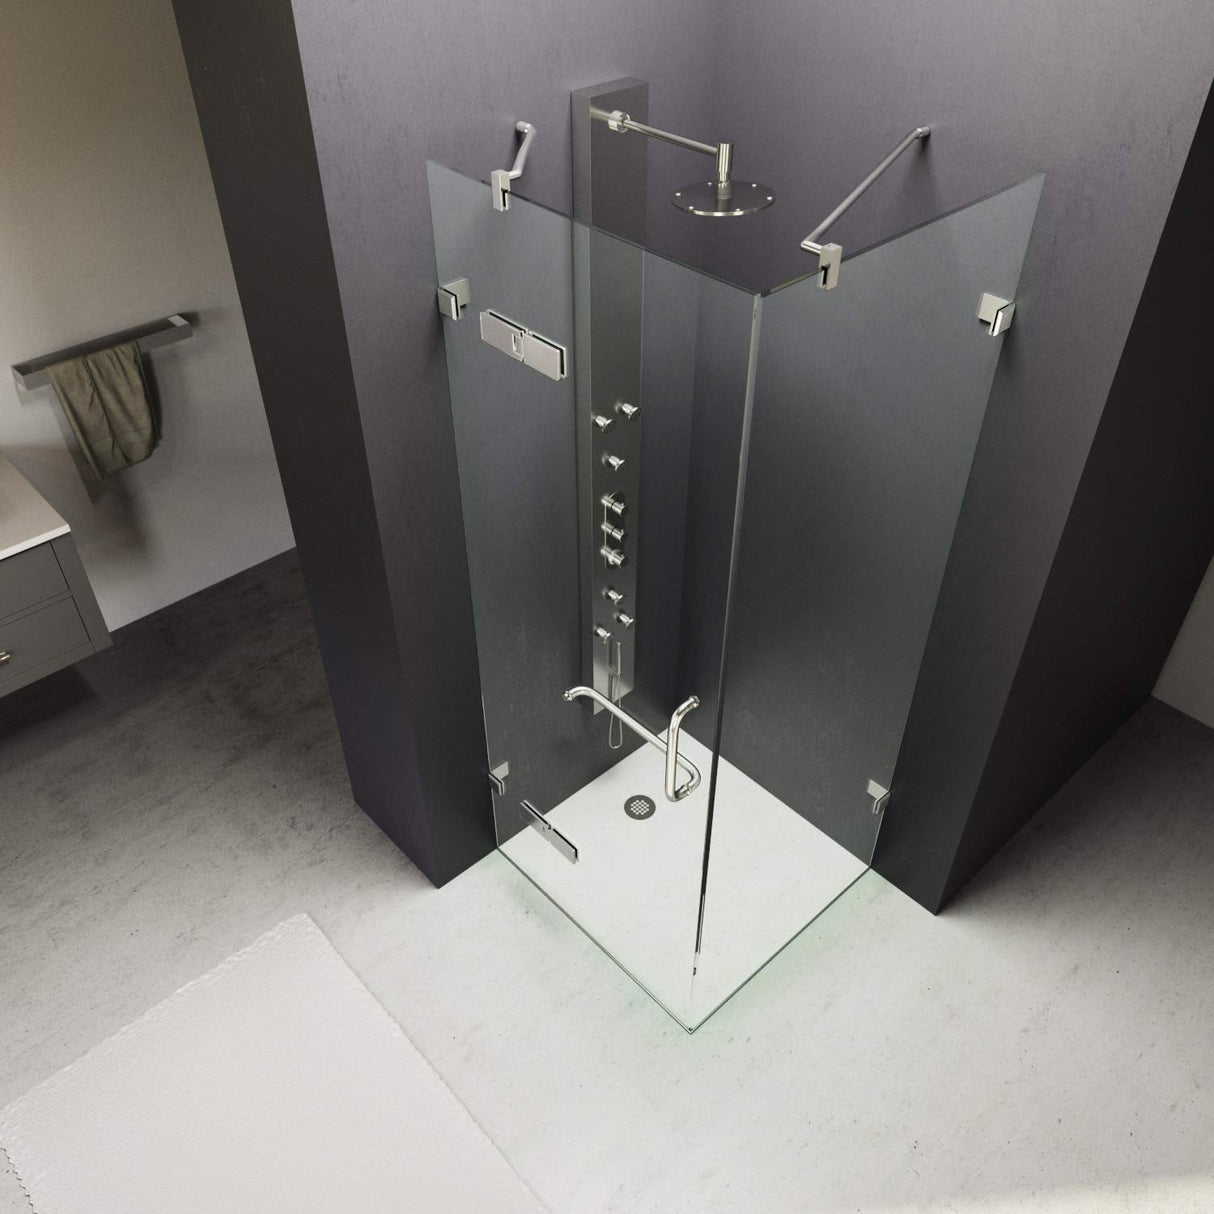 VIGO 34 in. x 34 in. x 73 in. Monteray Frameless Hinged Square Shower Enclosure with Clear 0.38" Tempered Glass and Hardware in Brushed Nickel Finish with Reversible Handle - VG6011BNCL363